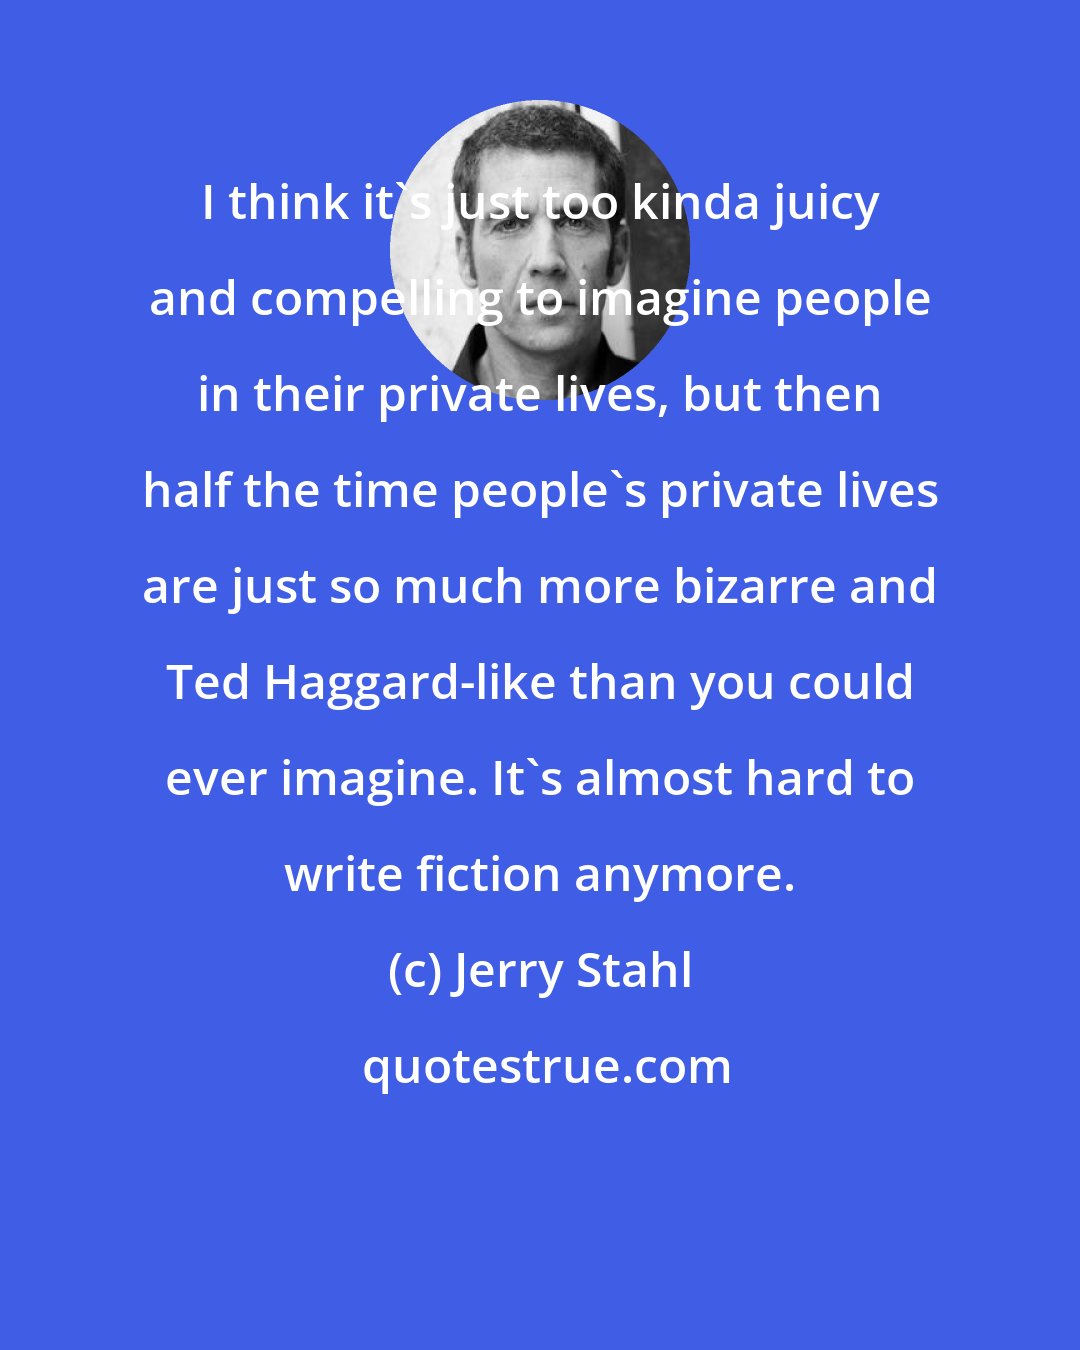 Jerry Stahl: I think it's just too kinda juicy and compelling to imagine people in their private lives, but then half the time people's private lives are just so much more bizarre and Ted Haggard-like than you could ever imagine. It's almost hard to write fiction anymore.